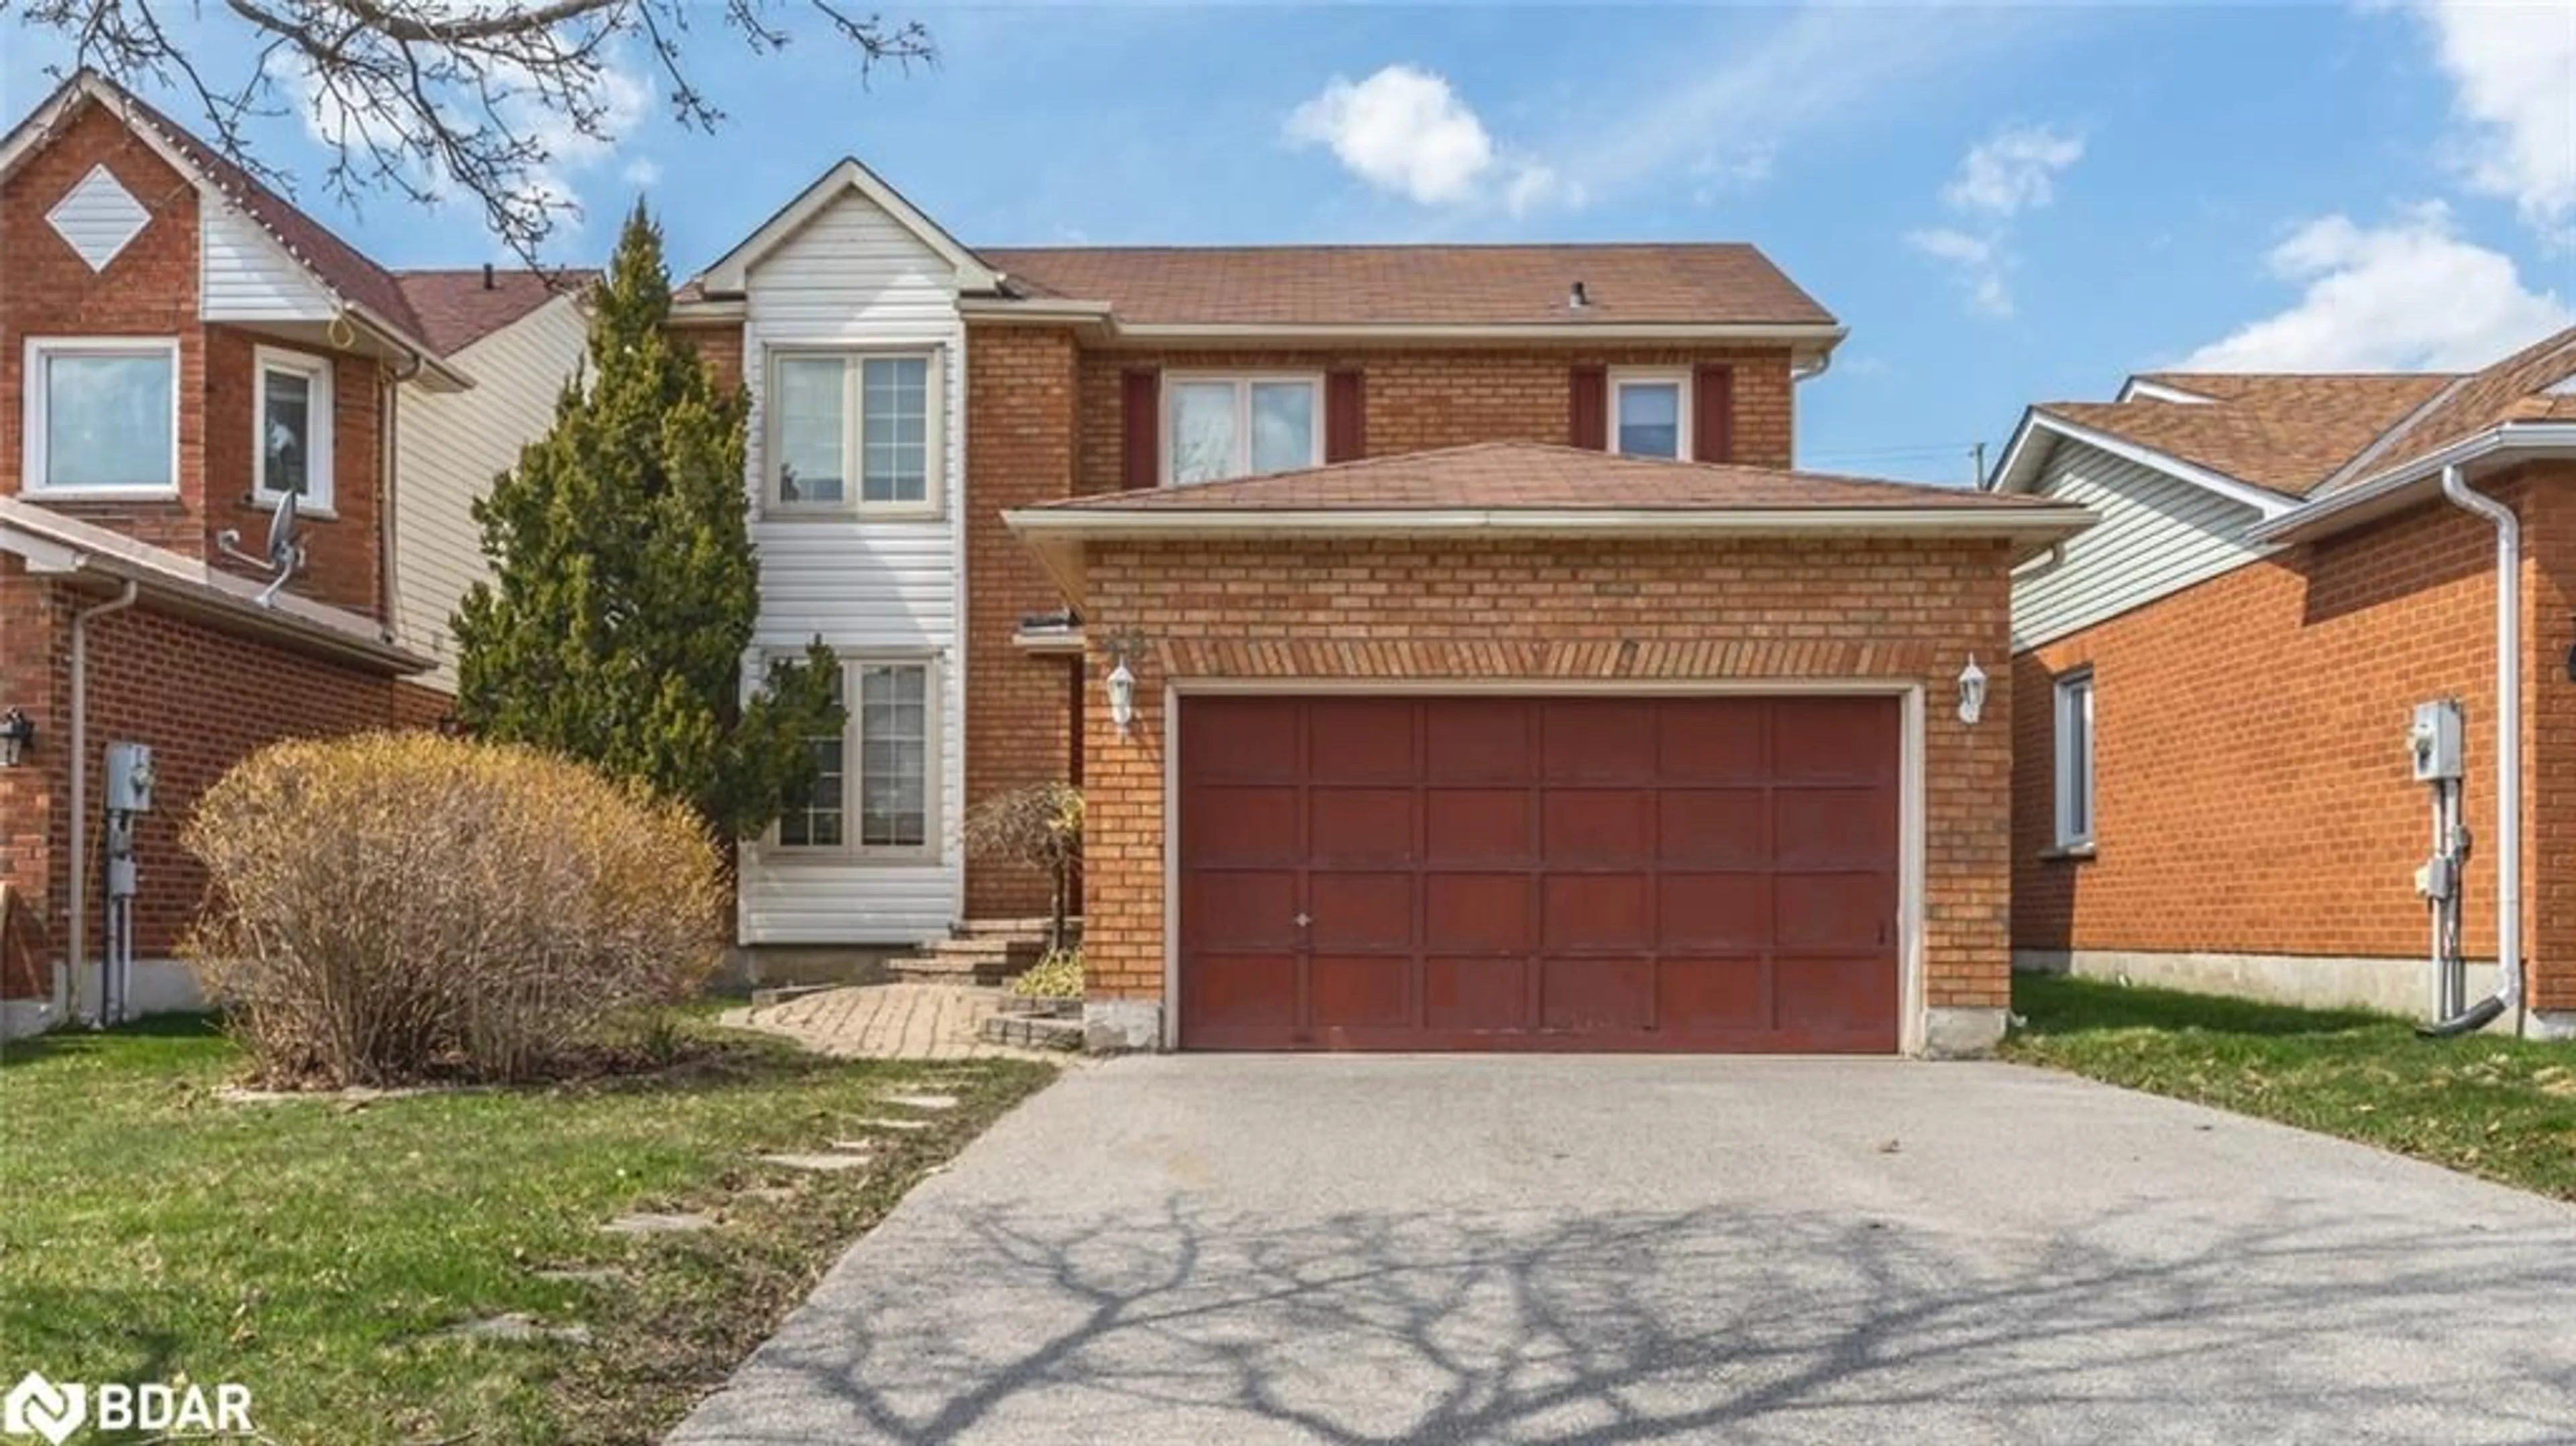 Home with brick exterior material for 48 O'shaughnessy Cres, Barrie Ontario L4N 7L8